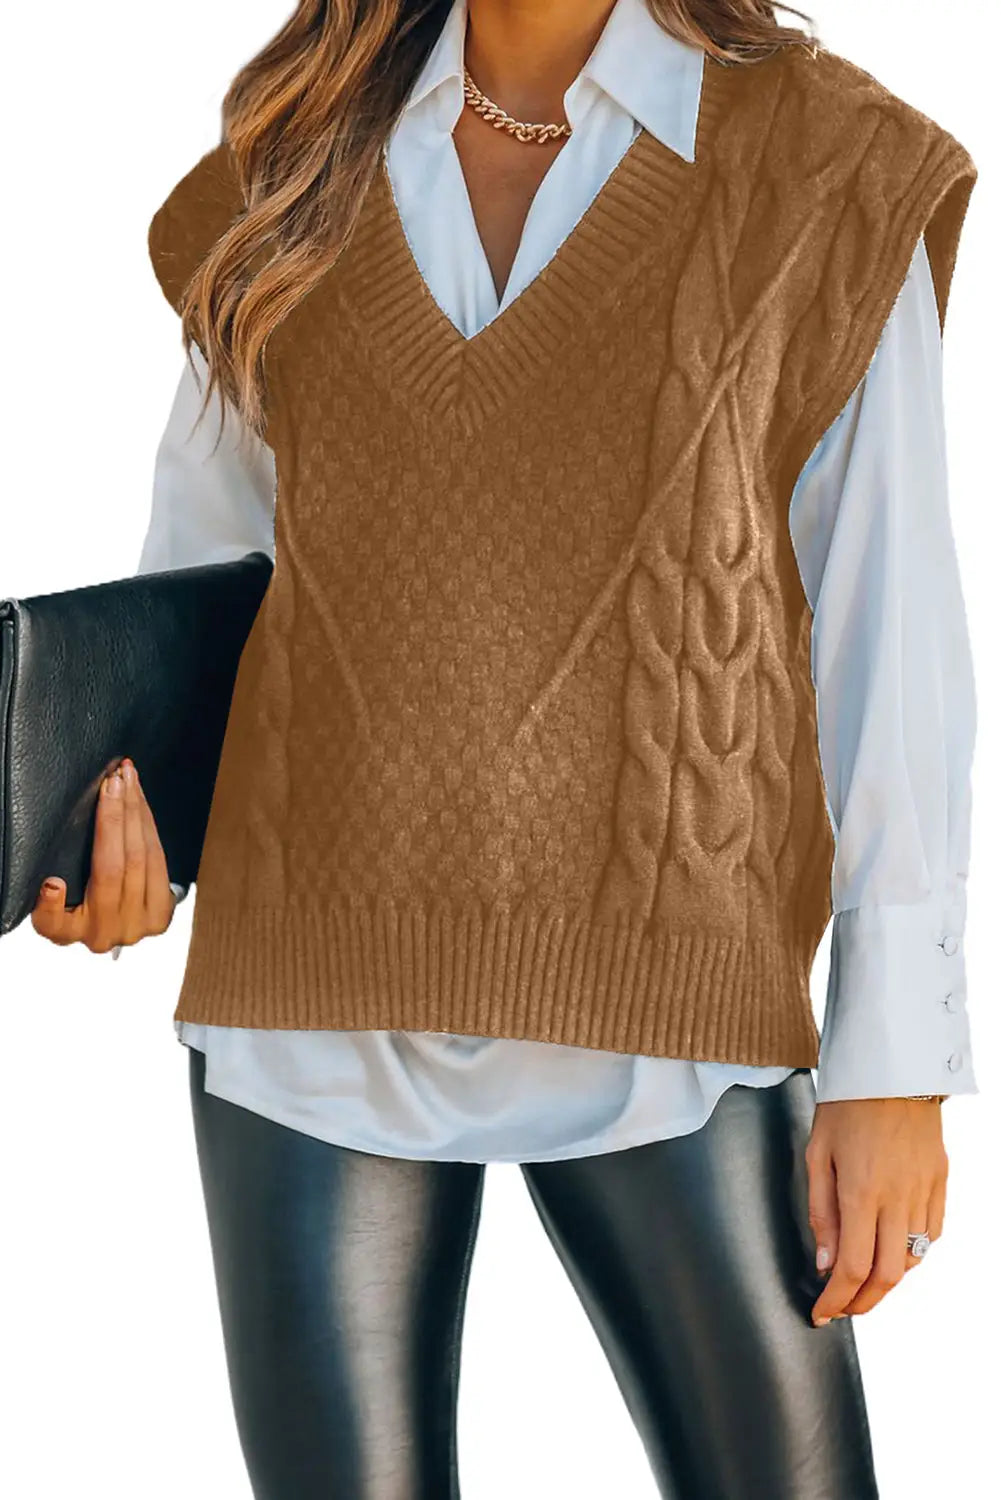 Brown v-neck twist knitted vest sweater - sweaters & cardigans